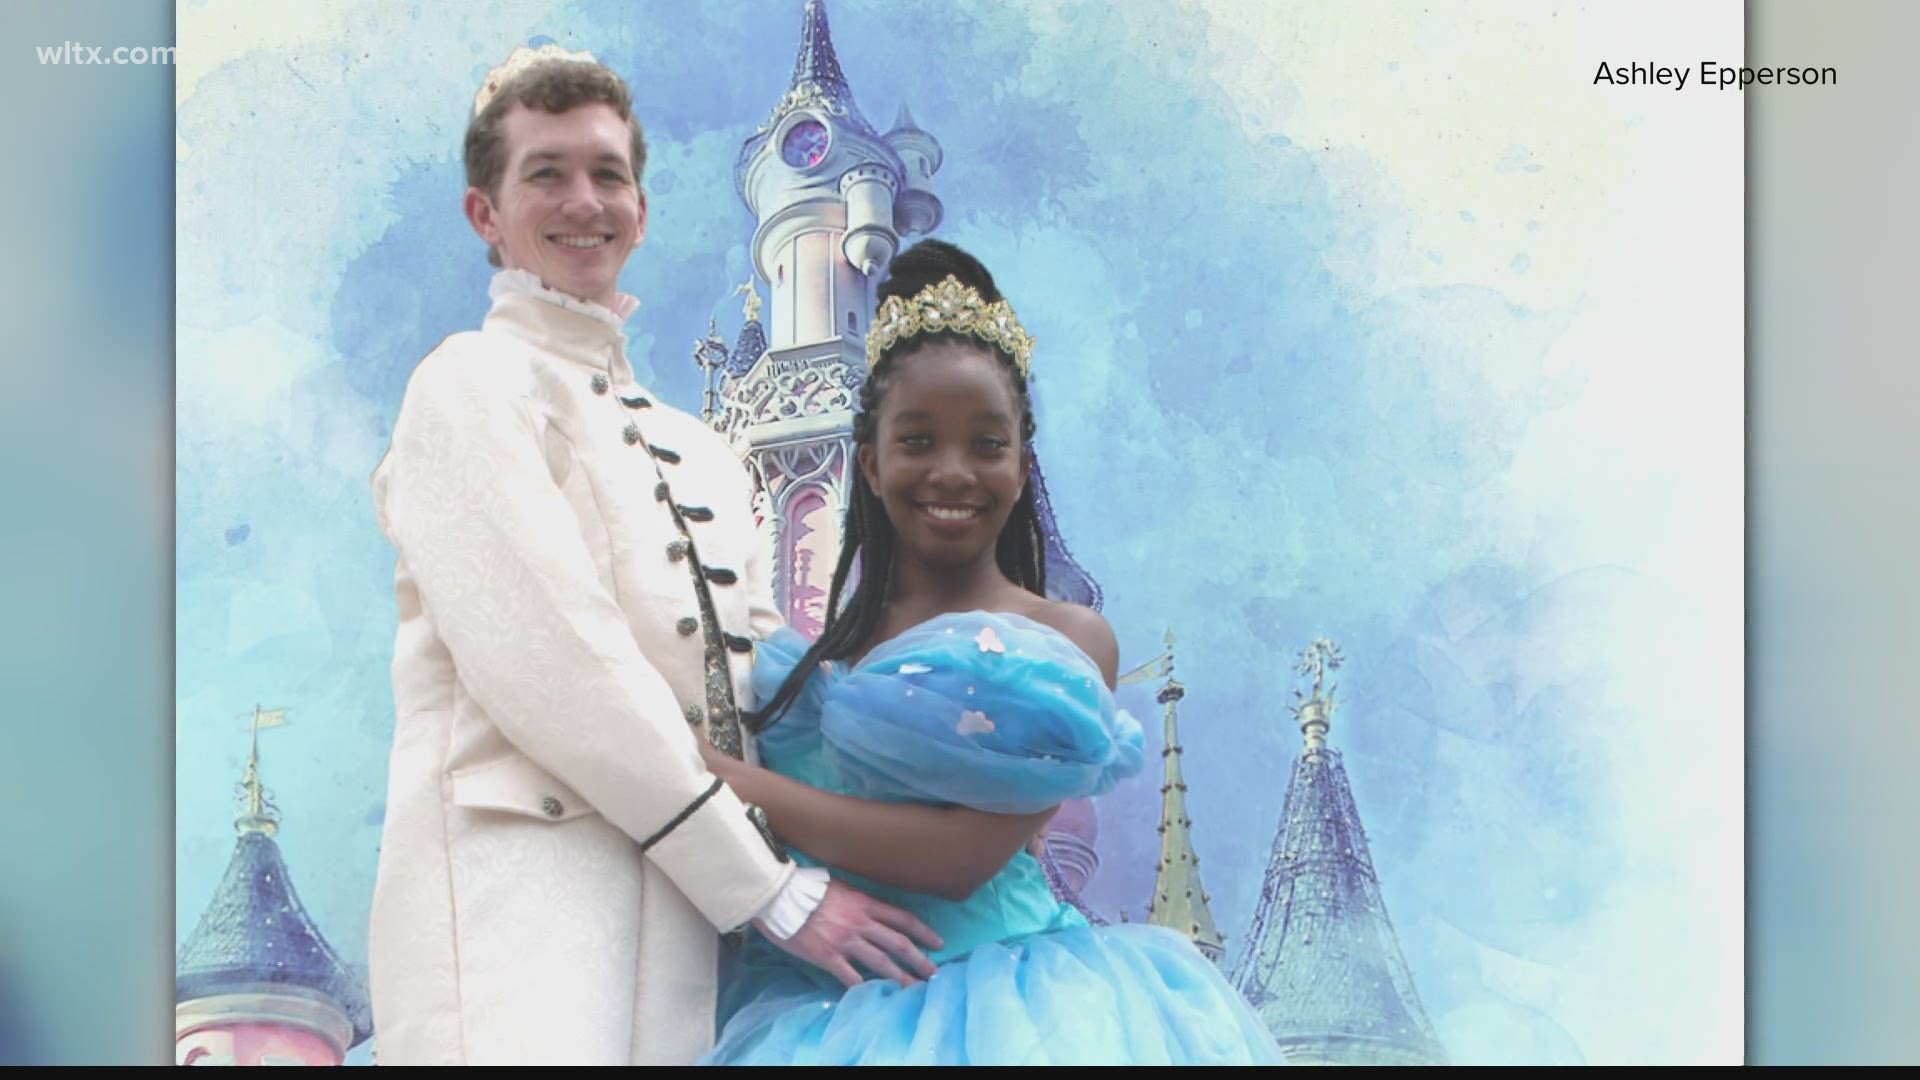 Town Theatre is bringing the new broadway adaptation of Cinderella to Columbia. Maya Fanning, who is taking the role of Ella, talks about what audiences can expect.